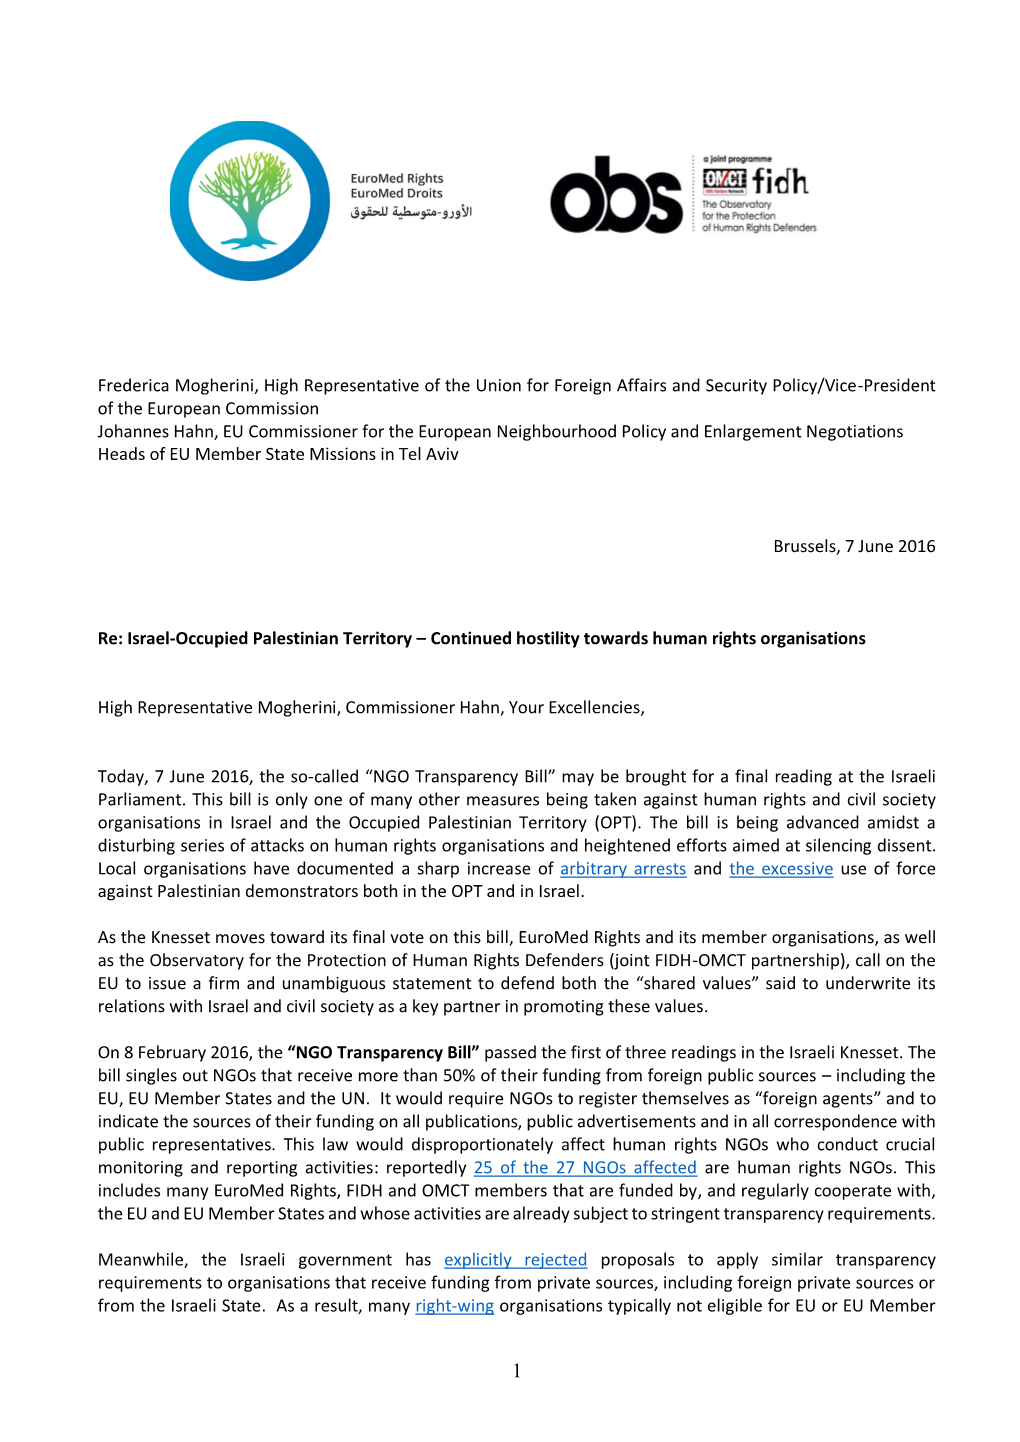 Euromed Rights-Obs Letter on the Continued Hostility Towards Human Rights Or (...) (